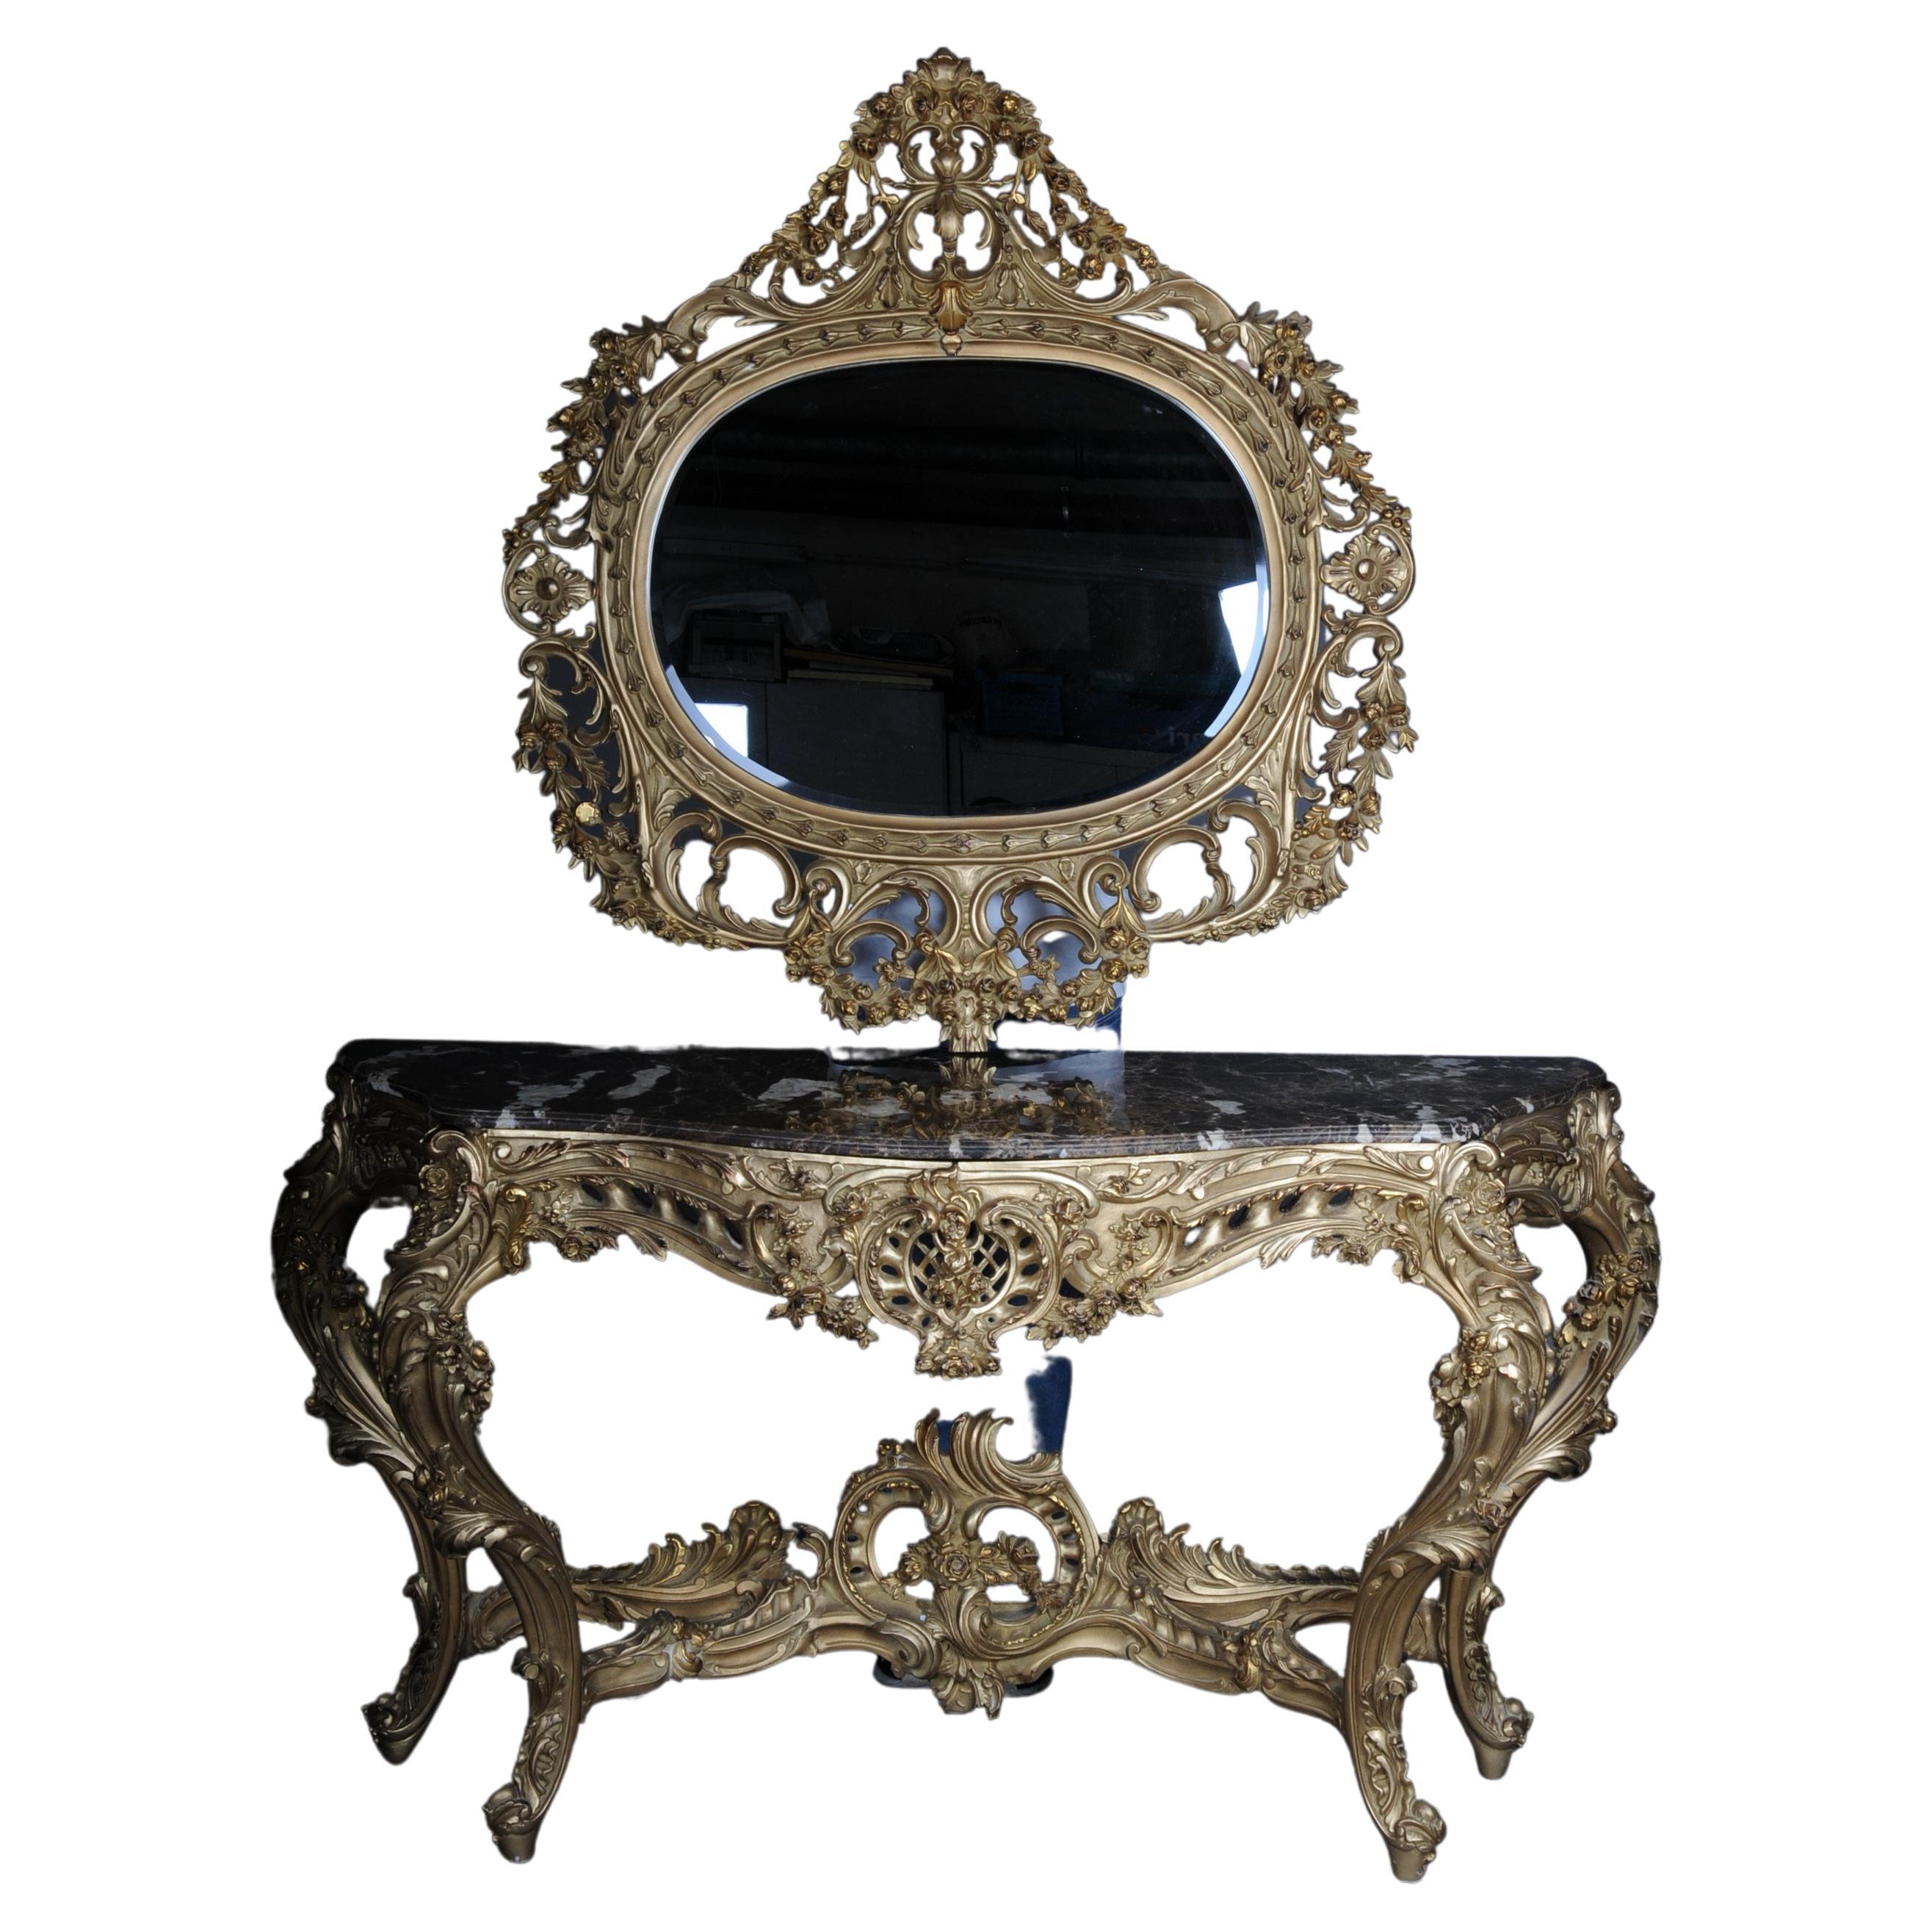 Magnificent Rococo mirror console/sideboard, gold beech wood, gilt.

Impressive and richly carved wall console made of solid beech wood, hand-carved and gilded. Very high quality decorated with massive rococo elements. No stucco or gibberish! All